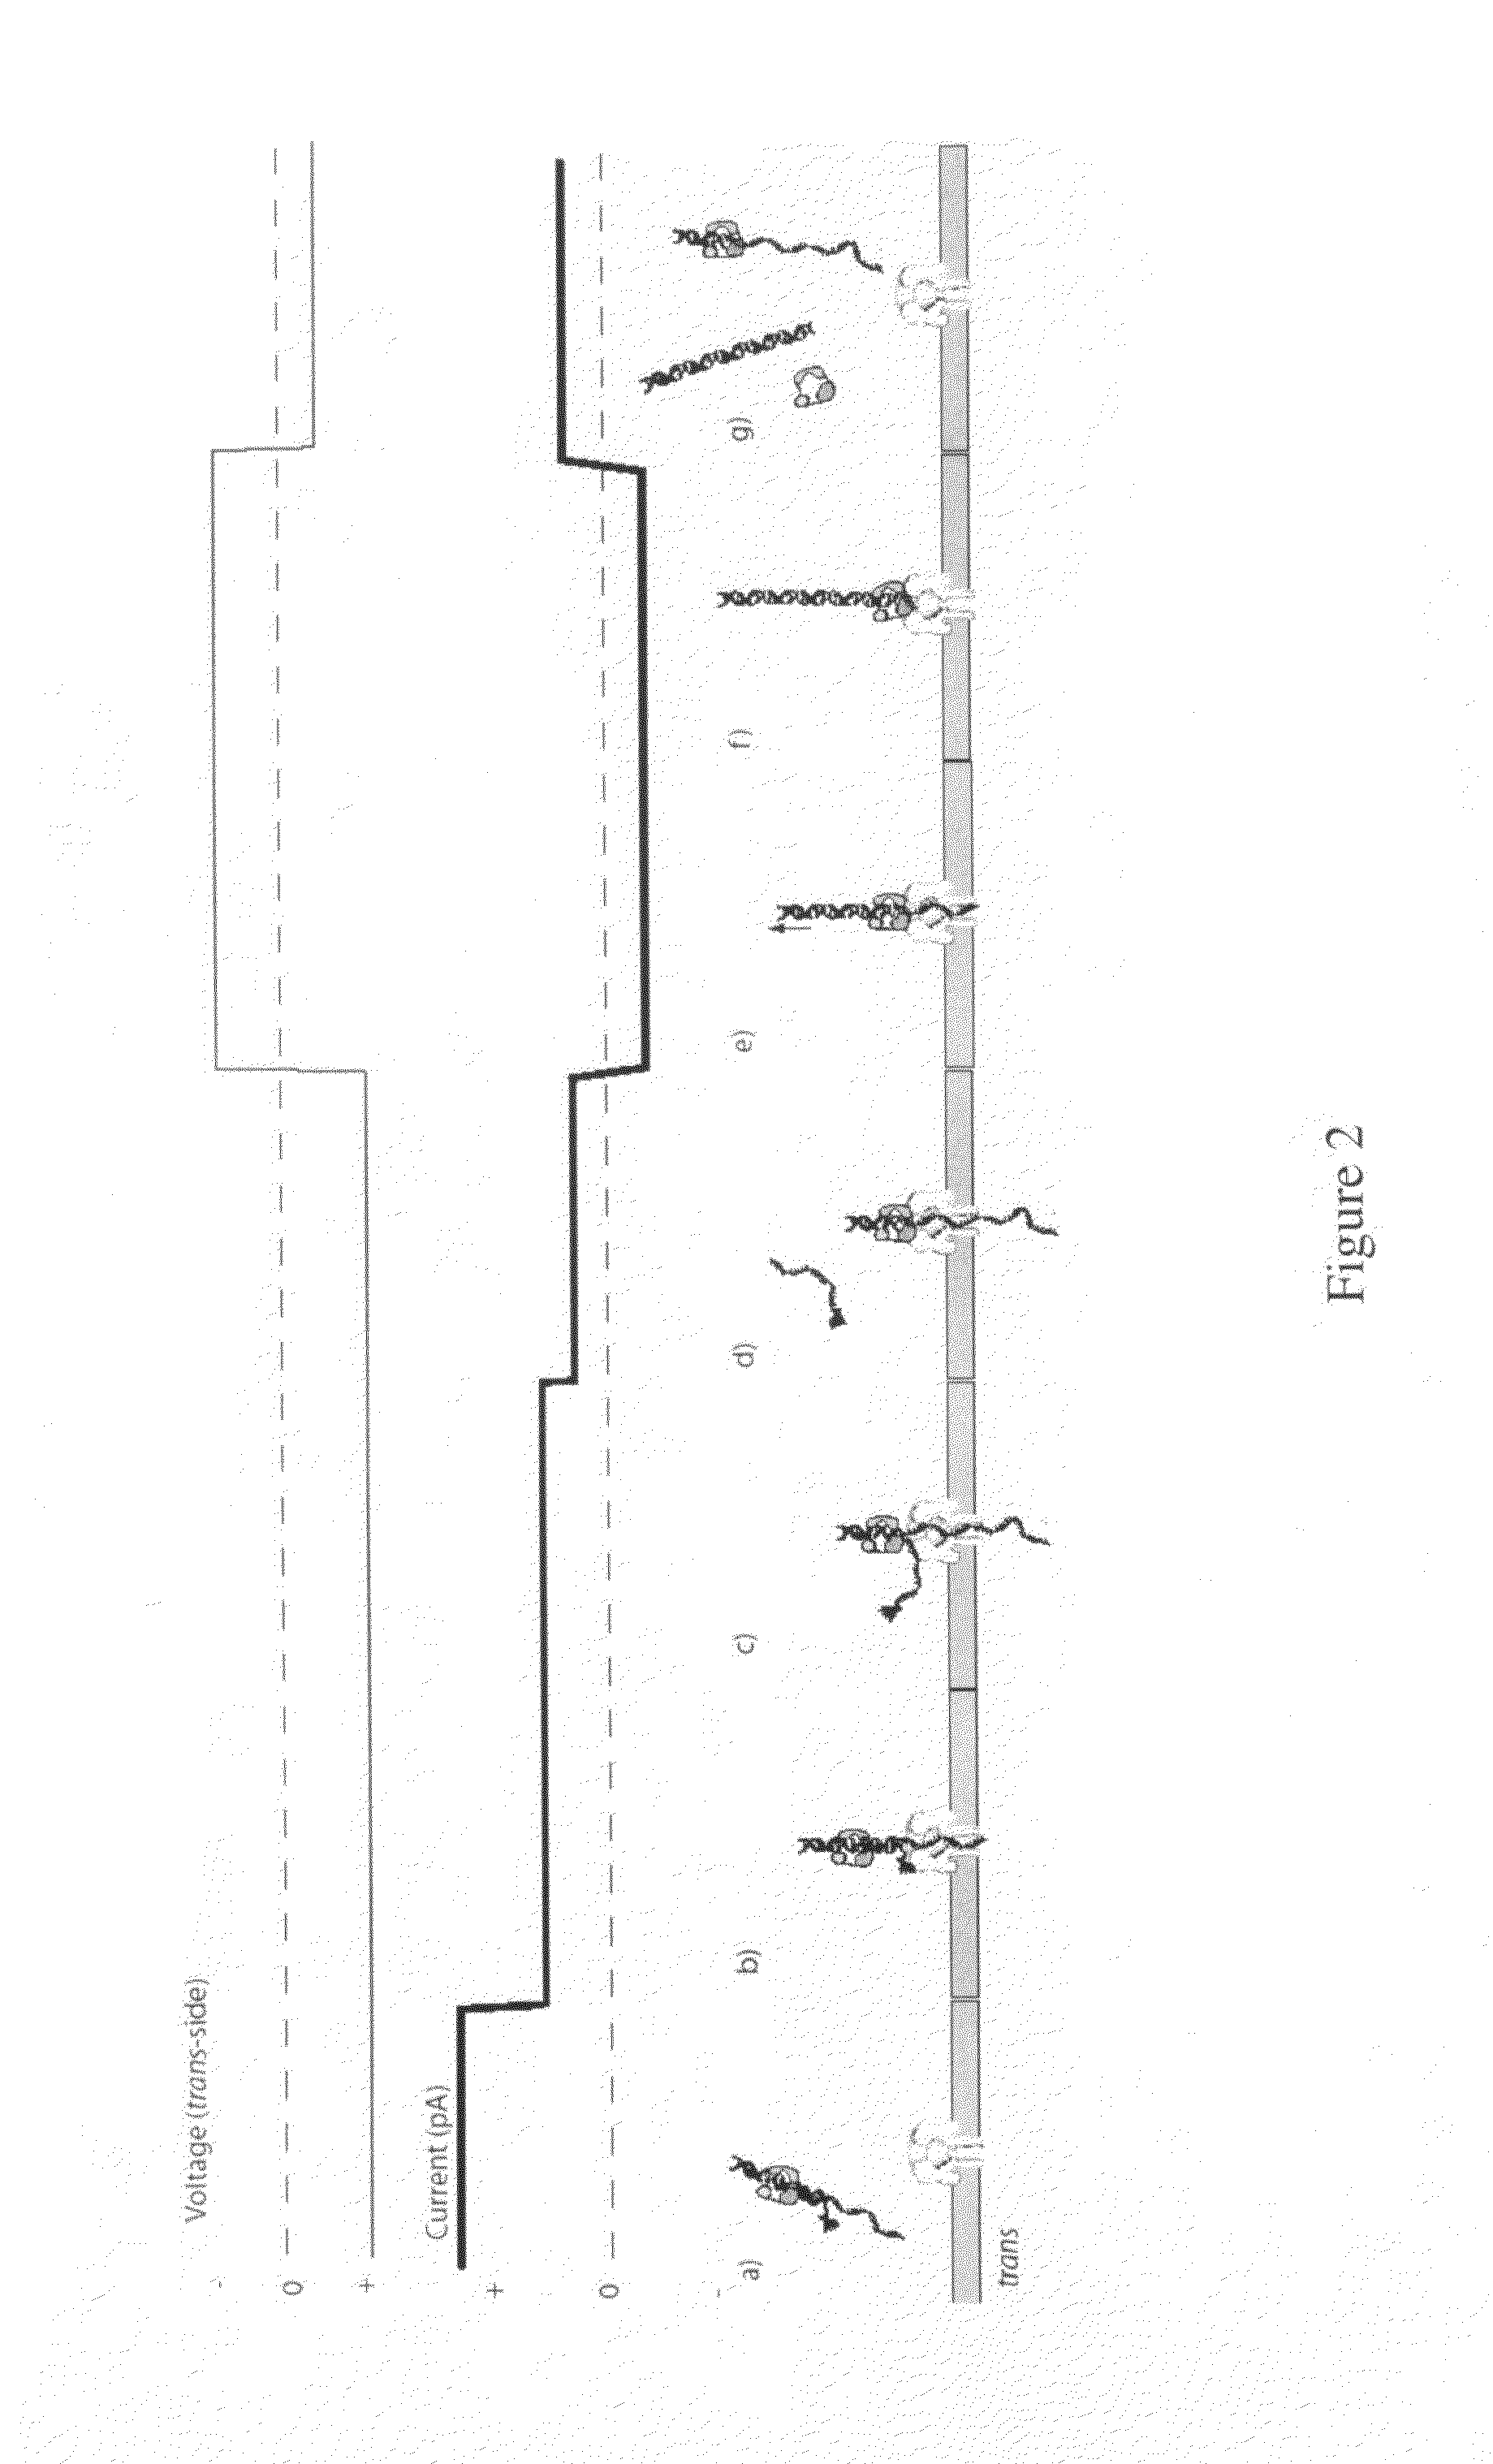 Compositions, devices, systems, and methods for using a nanopore